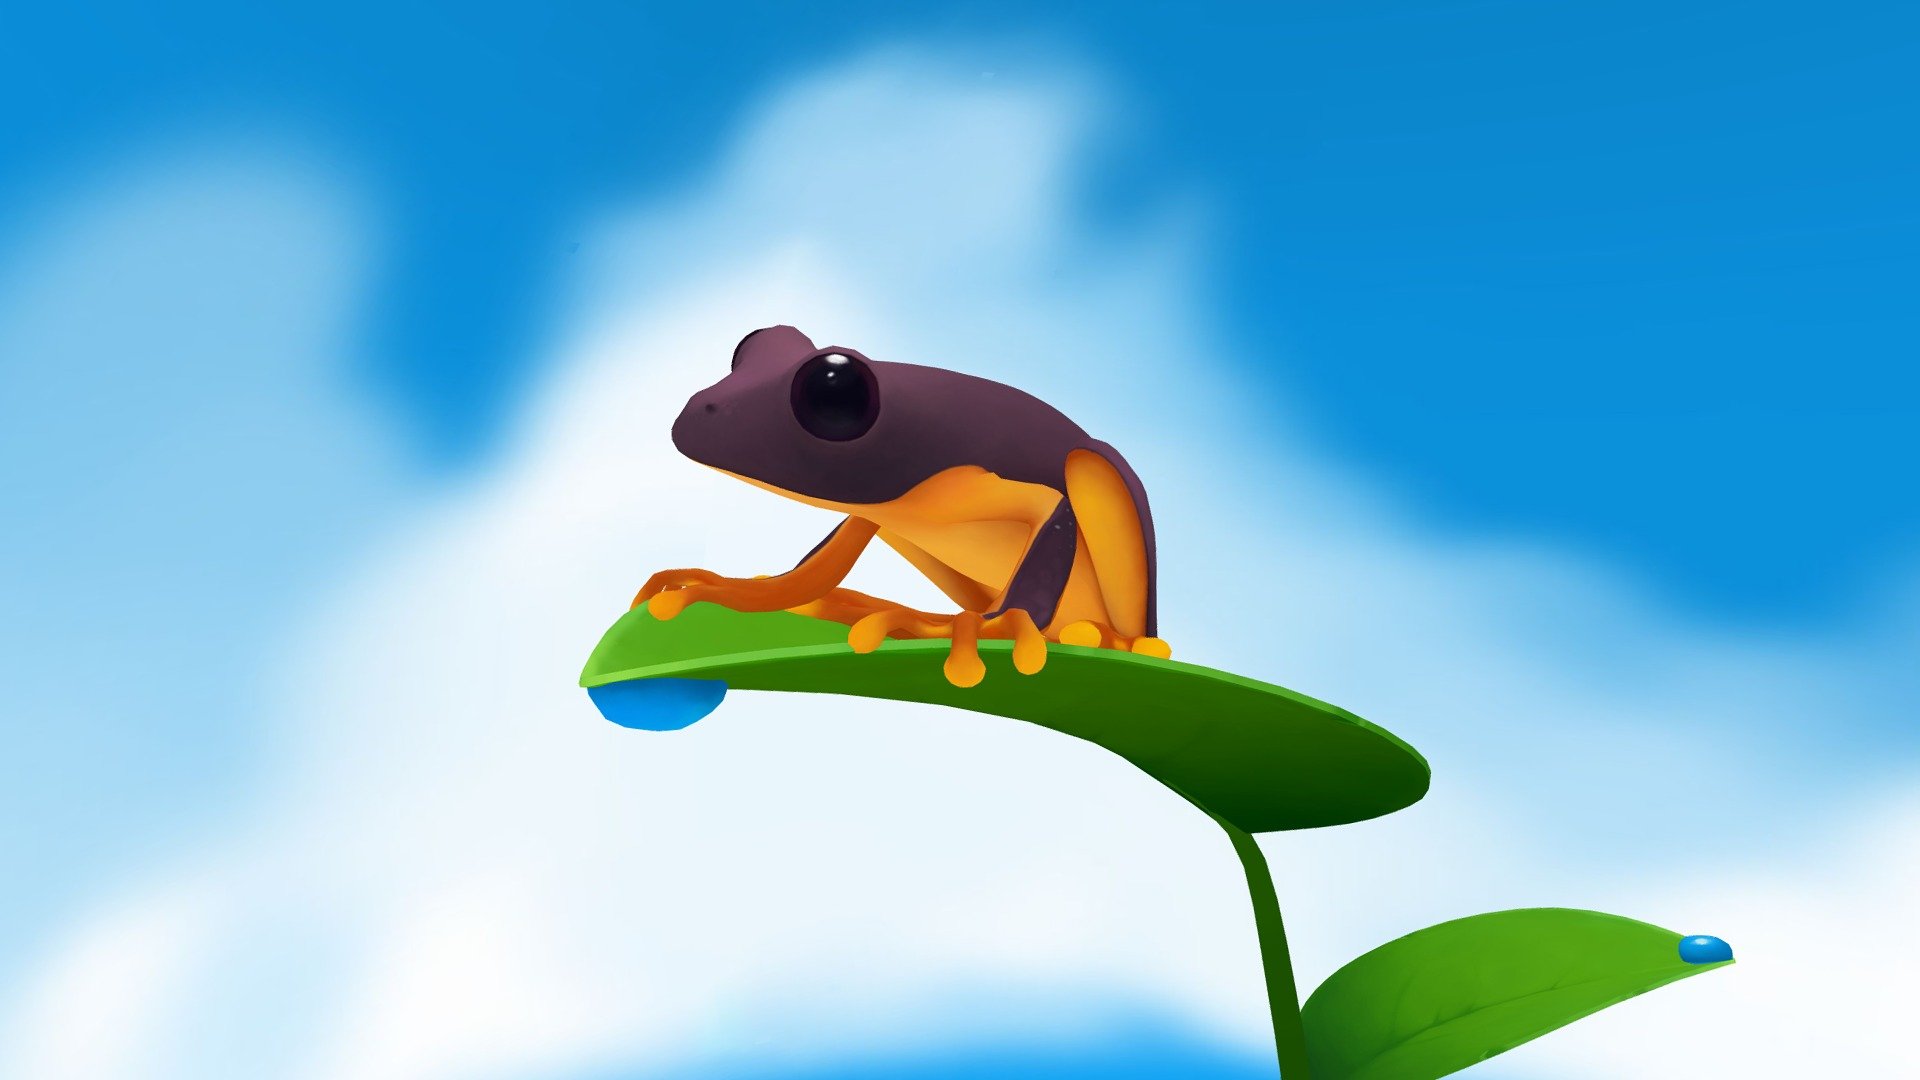 Small diorama of a Frog that is enjoying the summer weather on a leaf. I wanted to use a single sided object to frame the Frog.
Tools:
Blender 3D
Substance Painter
Clip Studio Paint - Frog on a leaf - 3D model by LC (@_lucaschang) 3d model